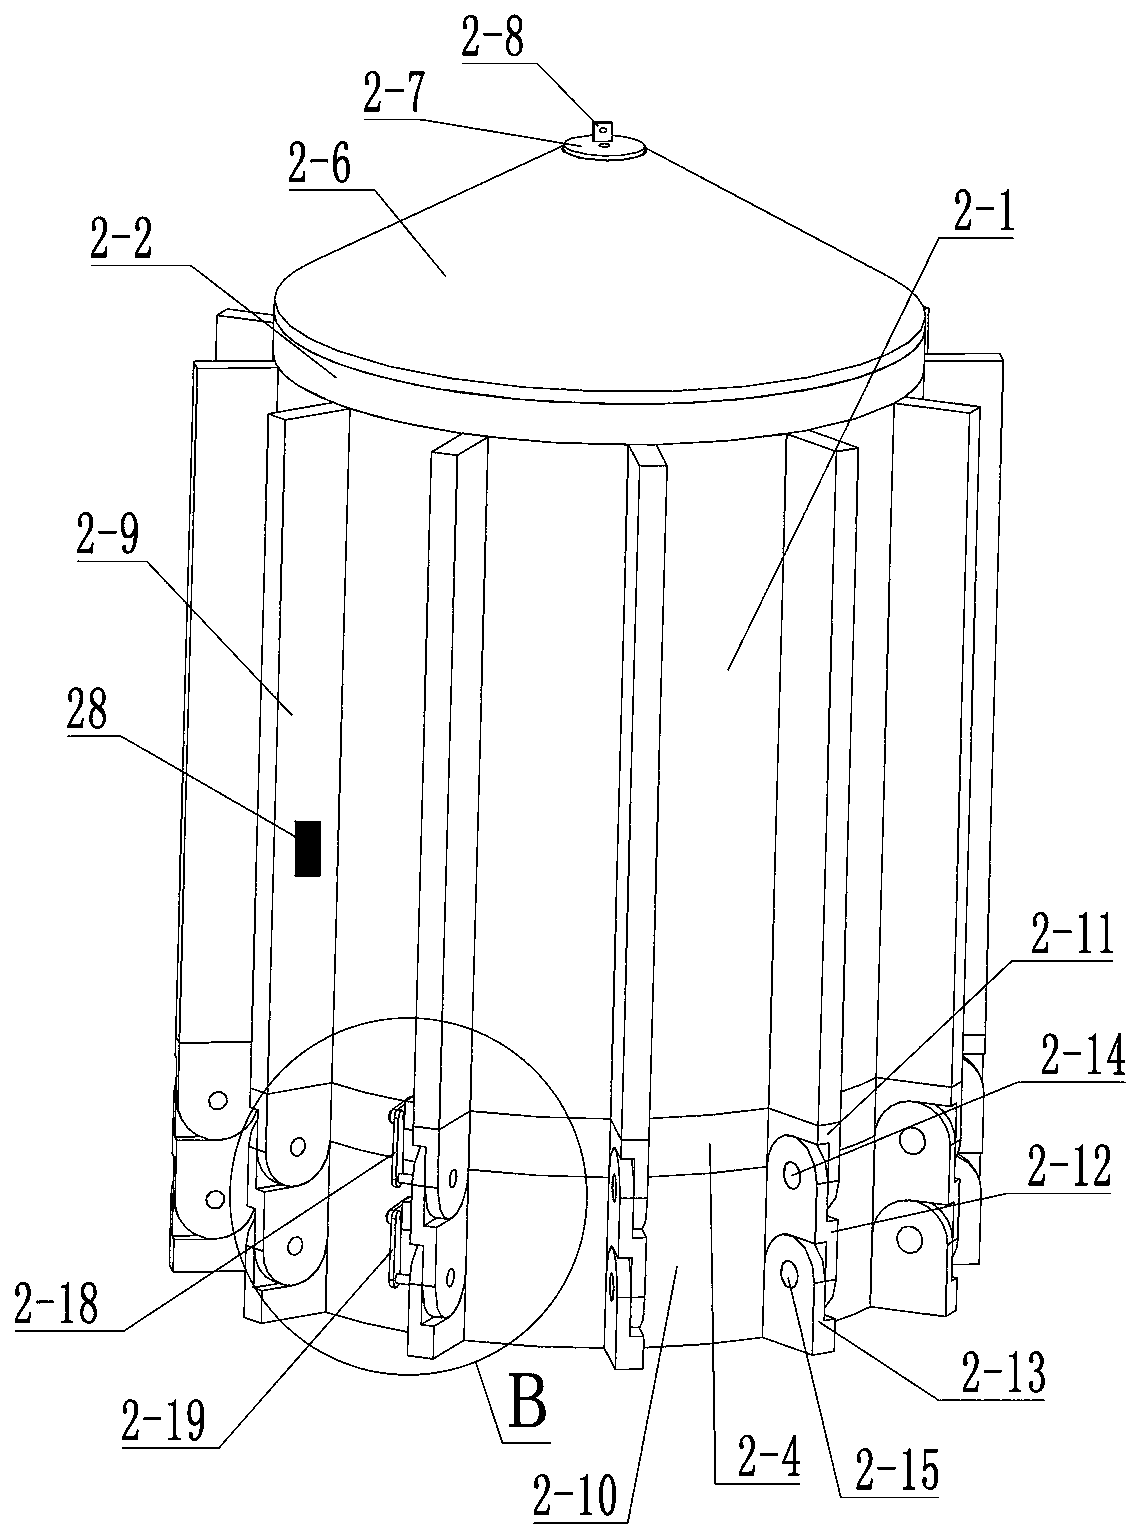 Non-well underground coal gasification ignition device